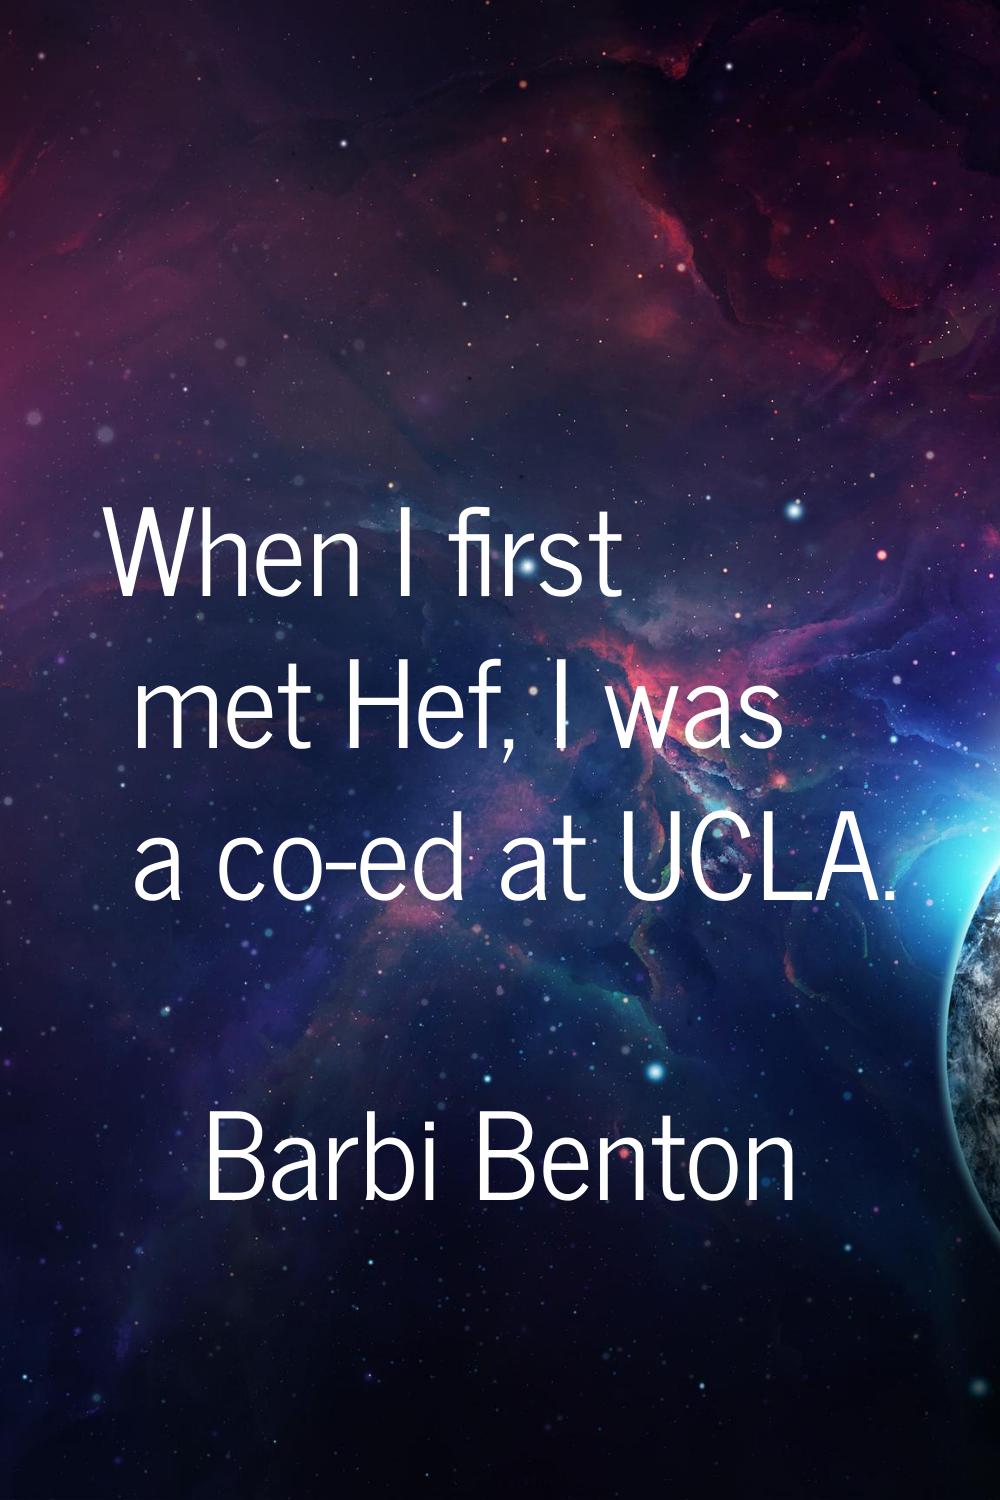 When I first met Hef, I was a co-ed at UCLA.